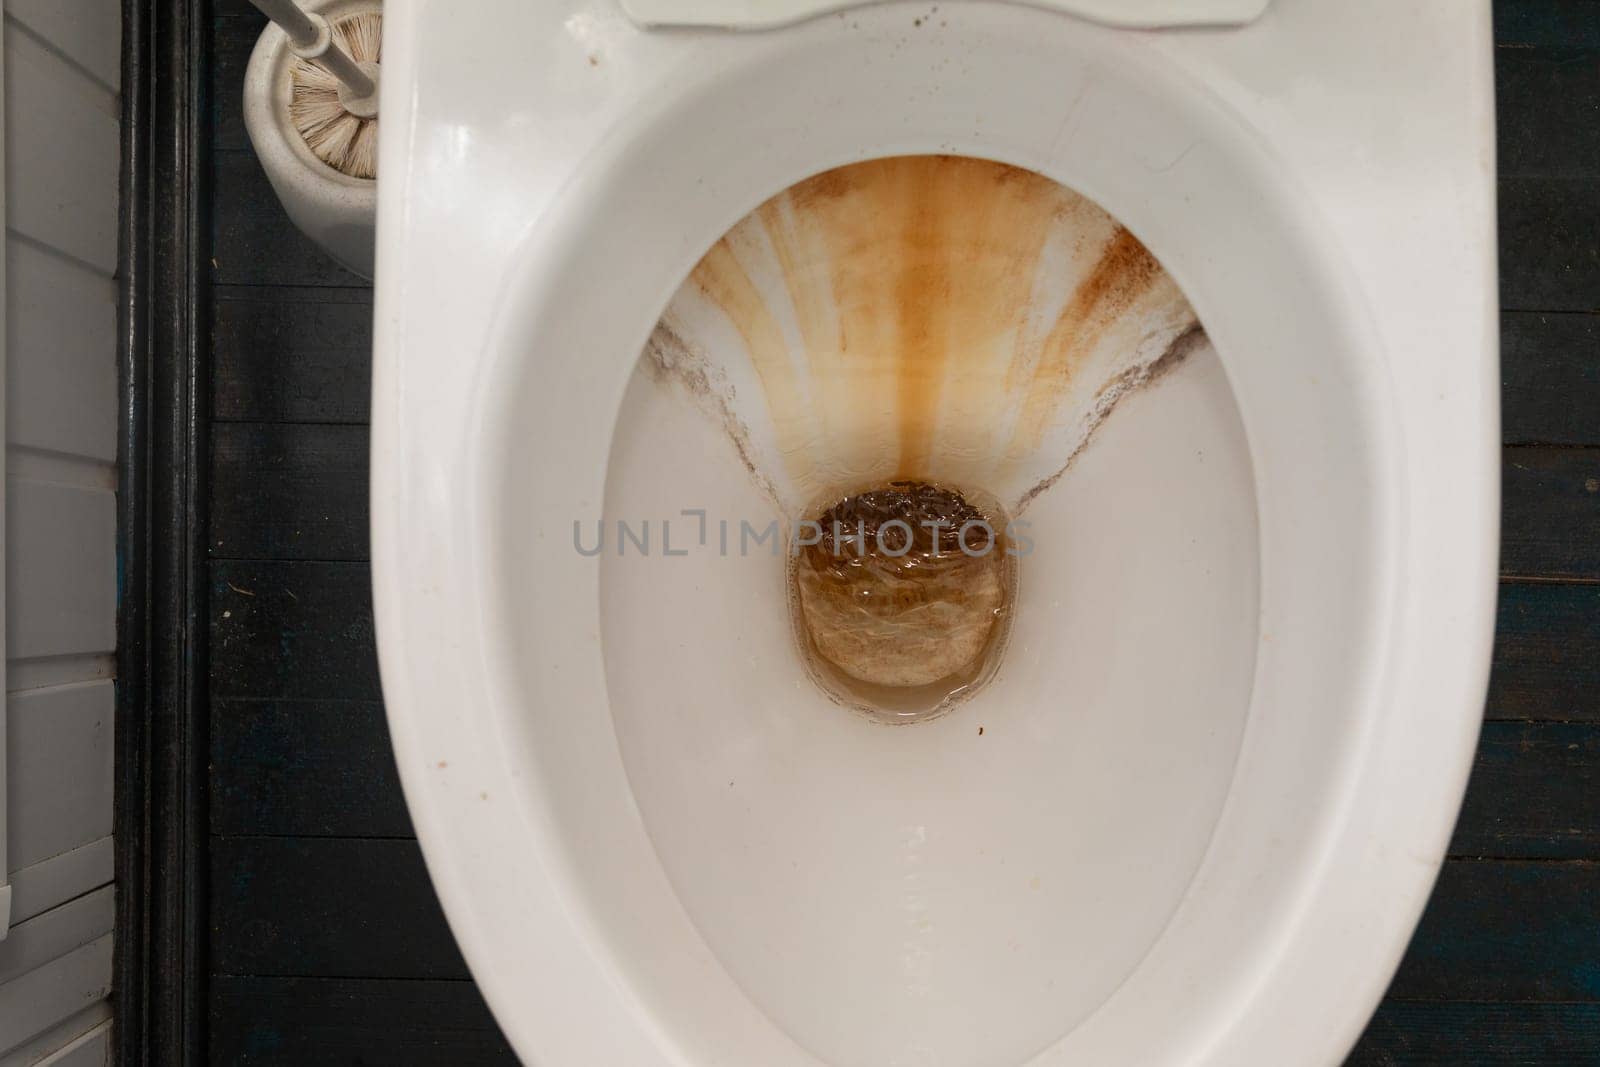 A white toilet bowl containing a single white shell, possibly dropped accidentally or intentionally. The shell contrasts against the porcelain surface of the toilet, creating a striking visual impact.